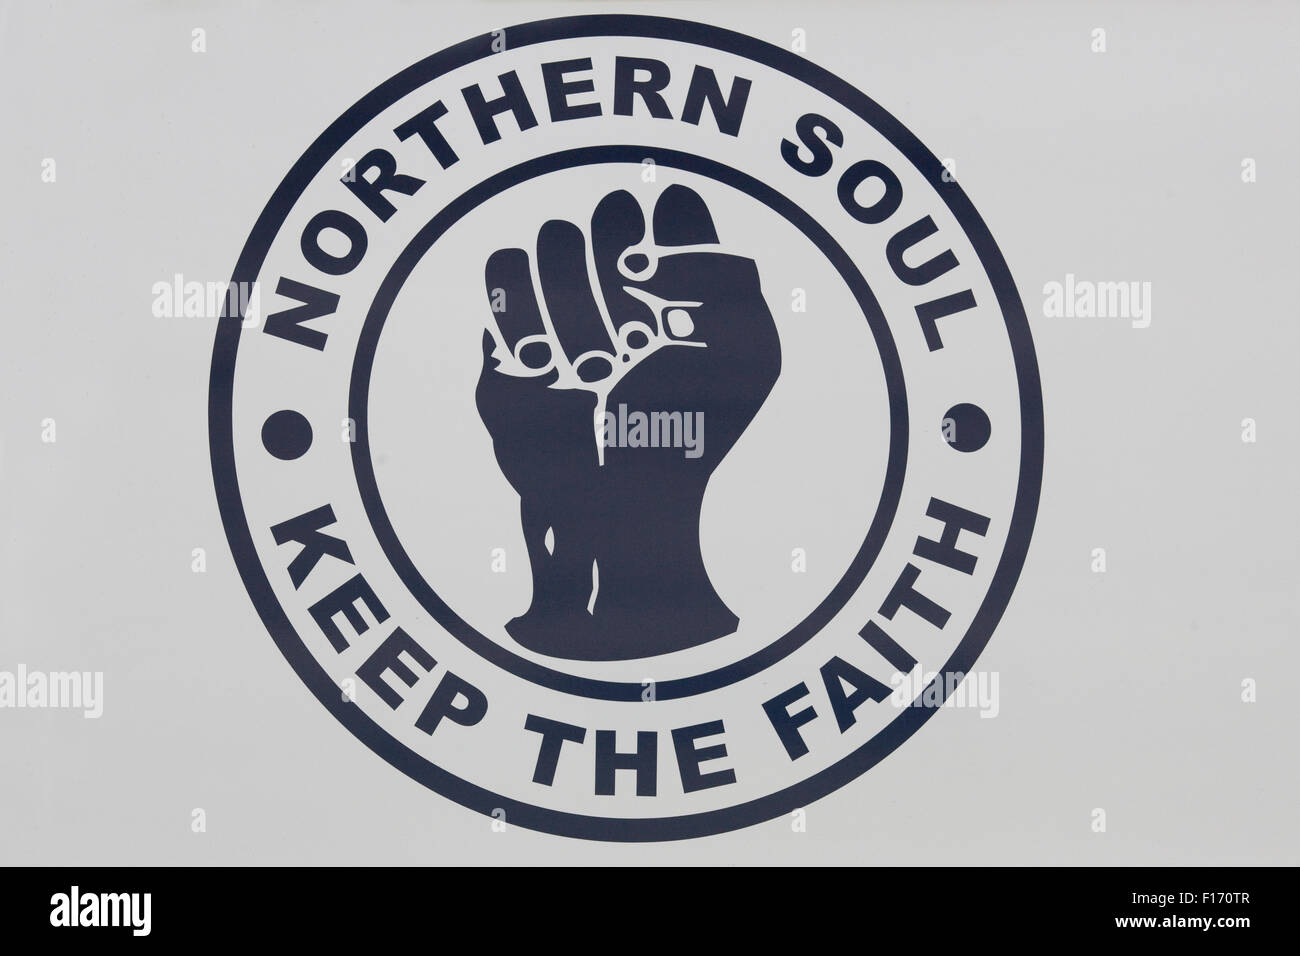 Stickers on a Volkswagen Camper Van 'Northern Soul' Keep the faith Stock Photo